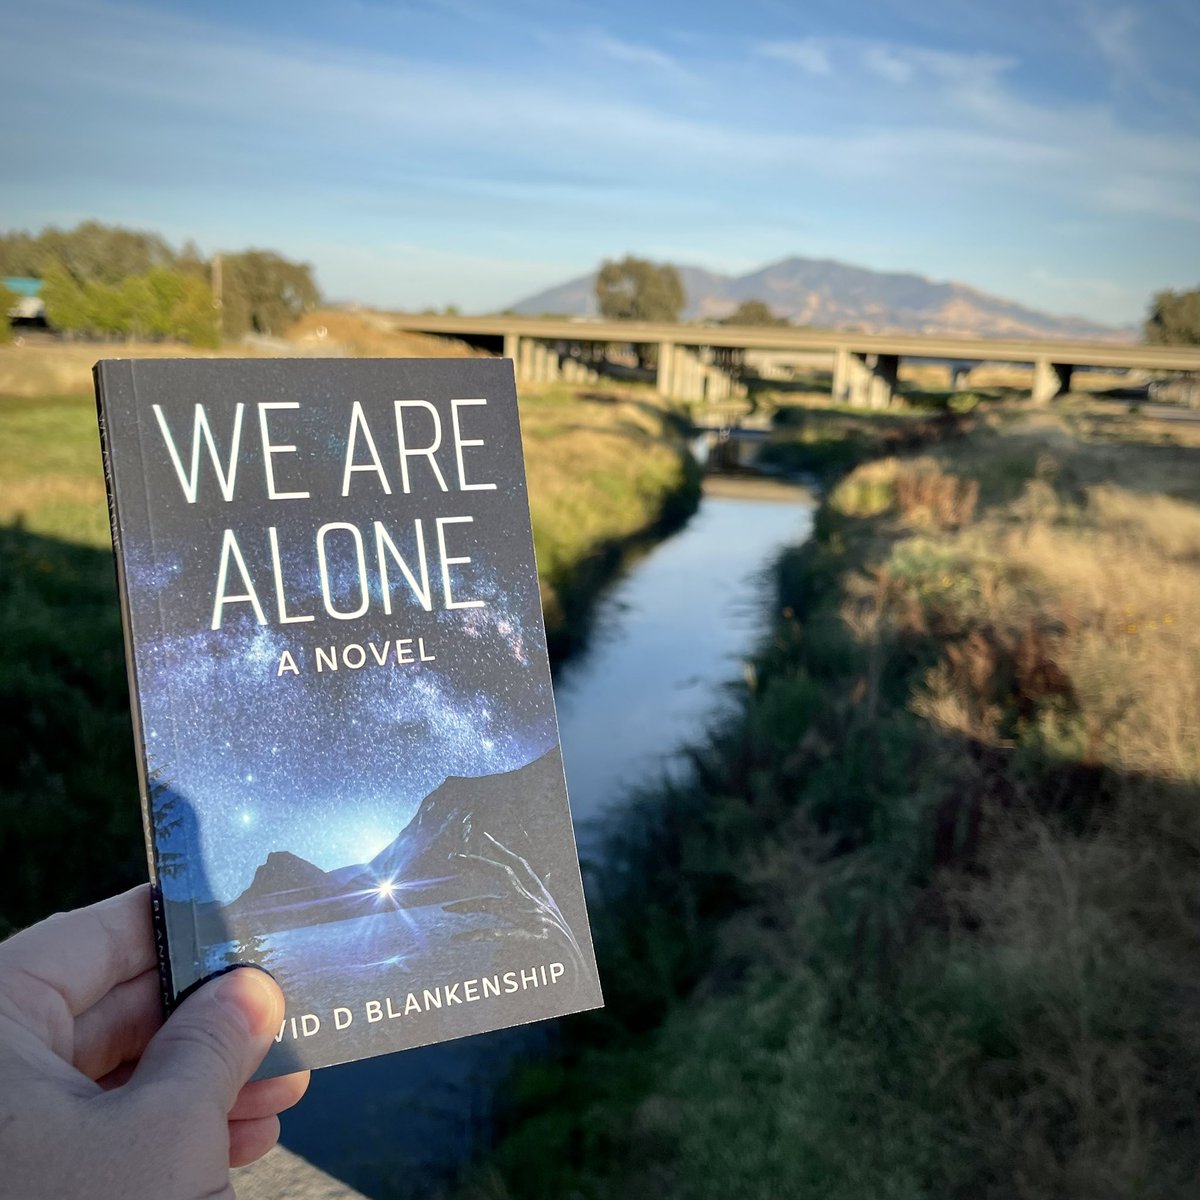 Took some pics of where the last chapter of We Are Alone takes place!
#bookx 
#BookTwitter 
#indieauthor 
#scifibooks 
#amazonbooks
#california
#book
#bookpic